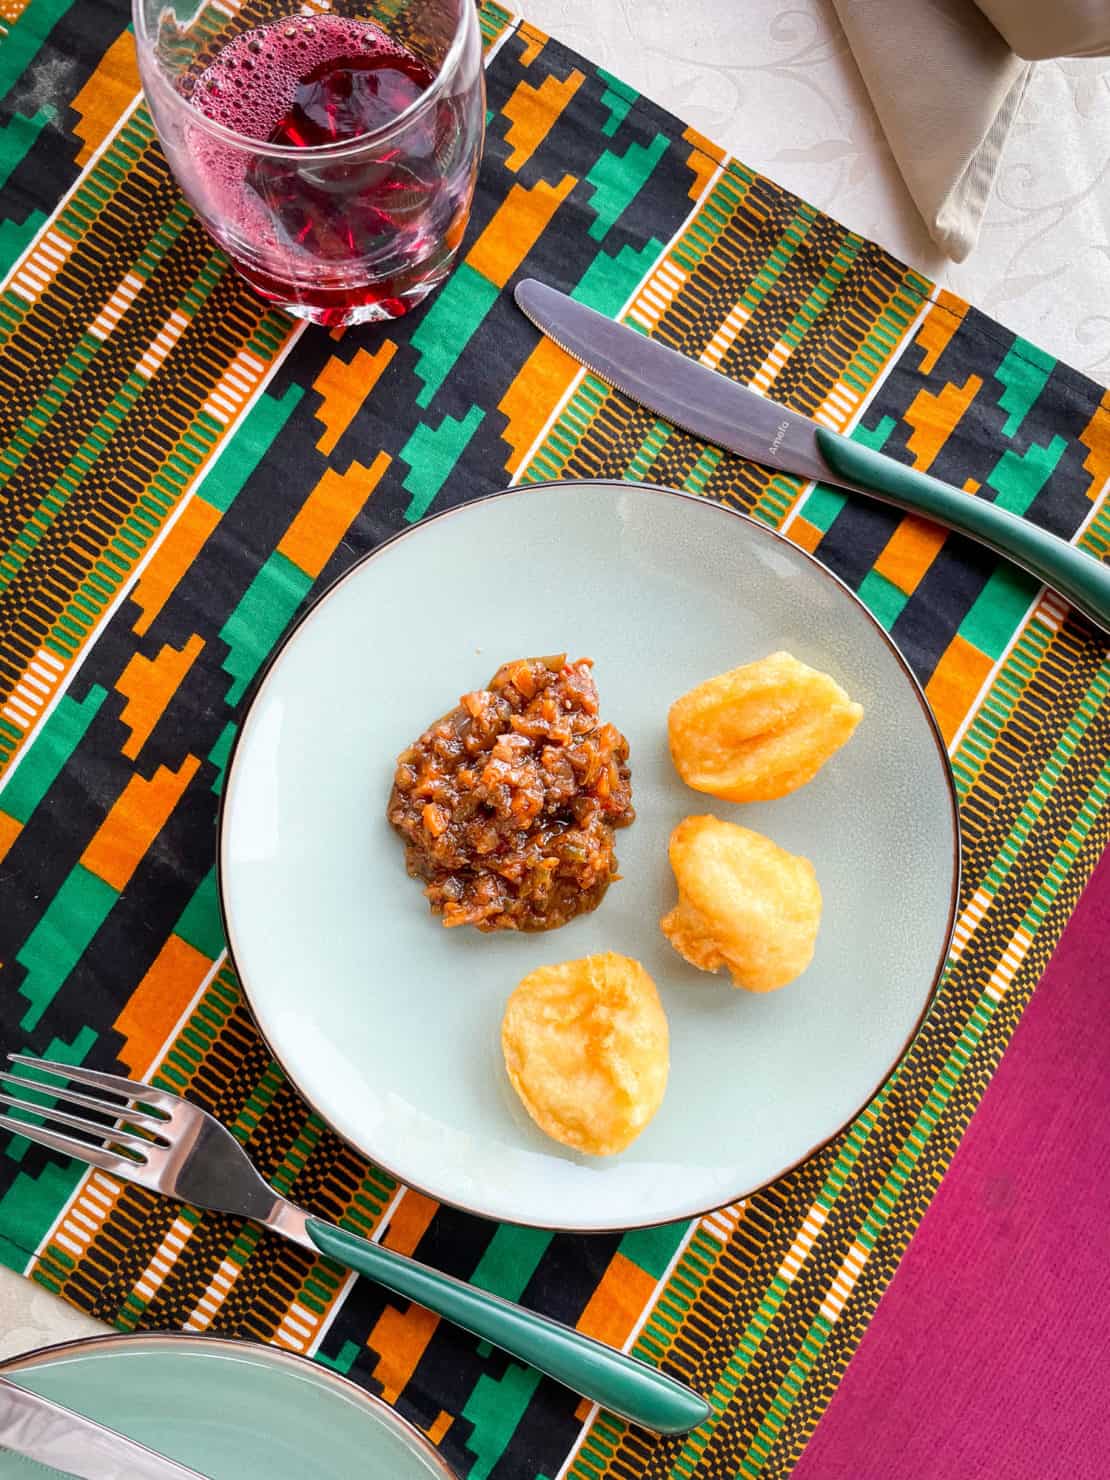 The gorgeous breakfast platter of akara with a chilli, onion and spice sauce on a colourful Gambian table mat